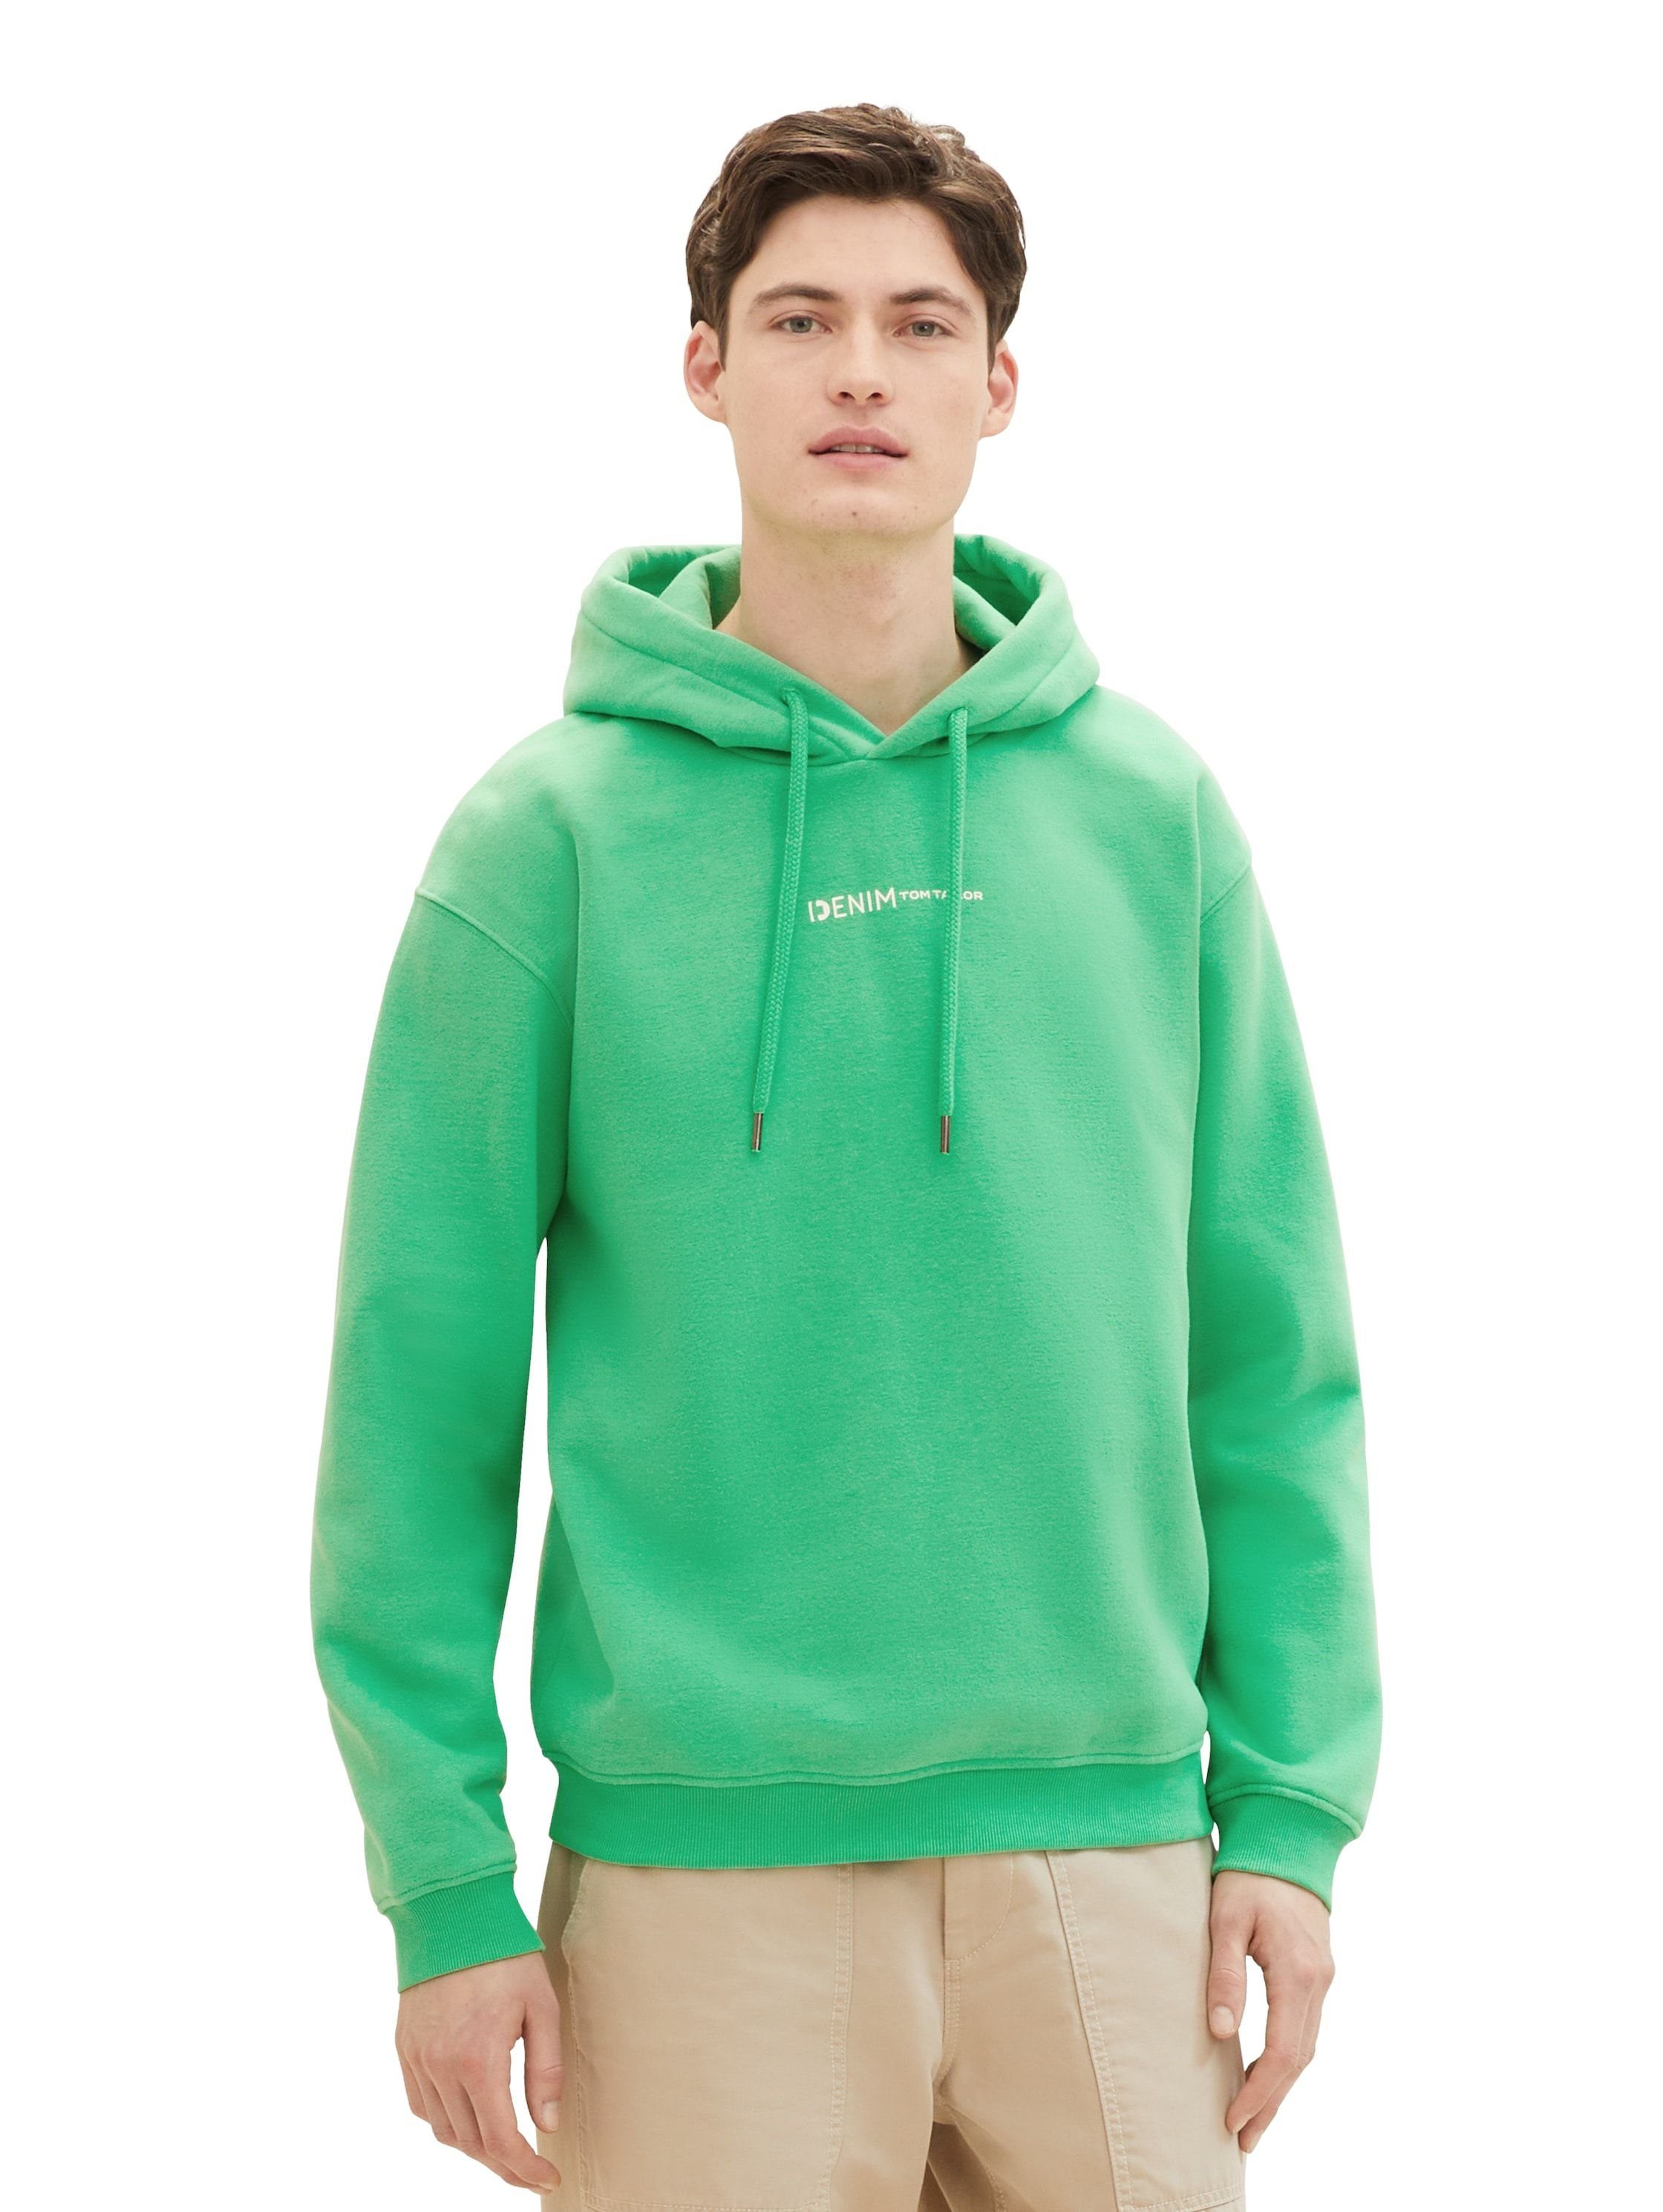 flash green TAILOR TOM classic Sweater